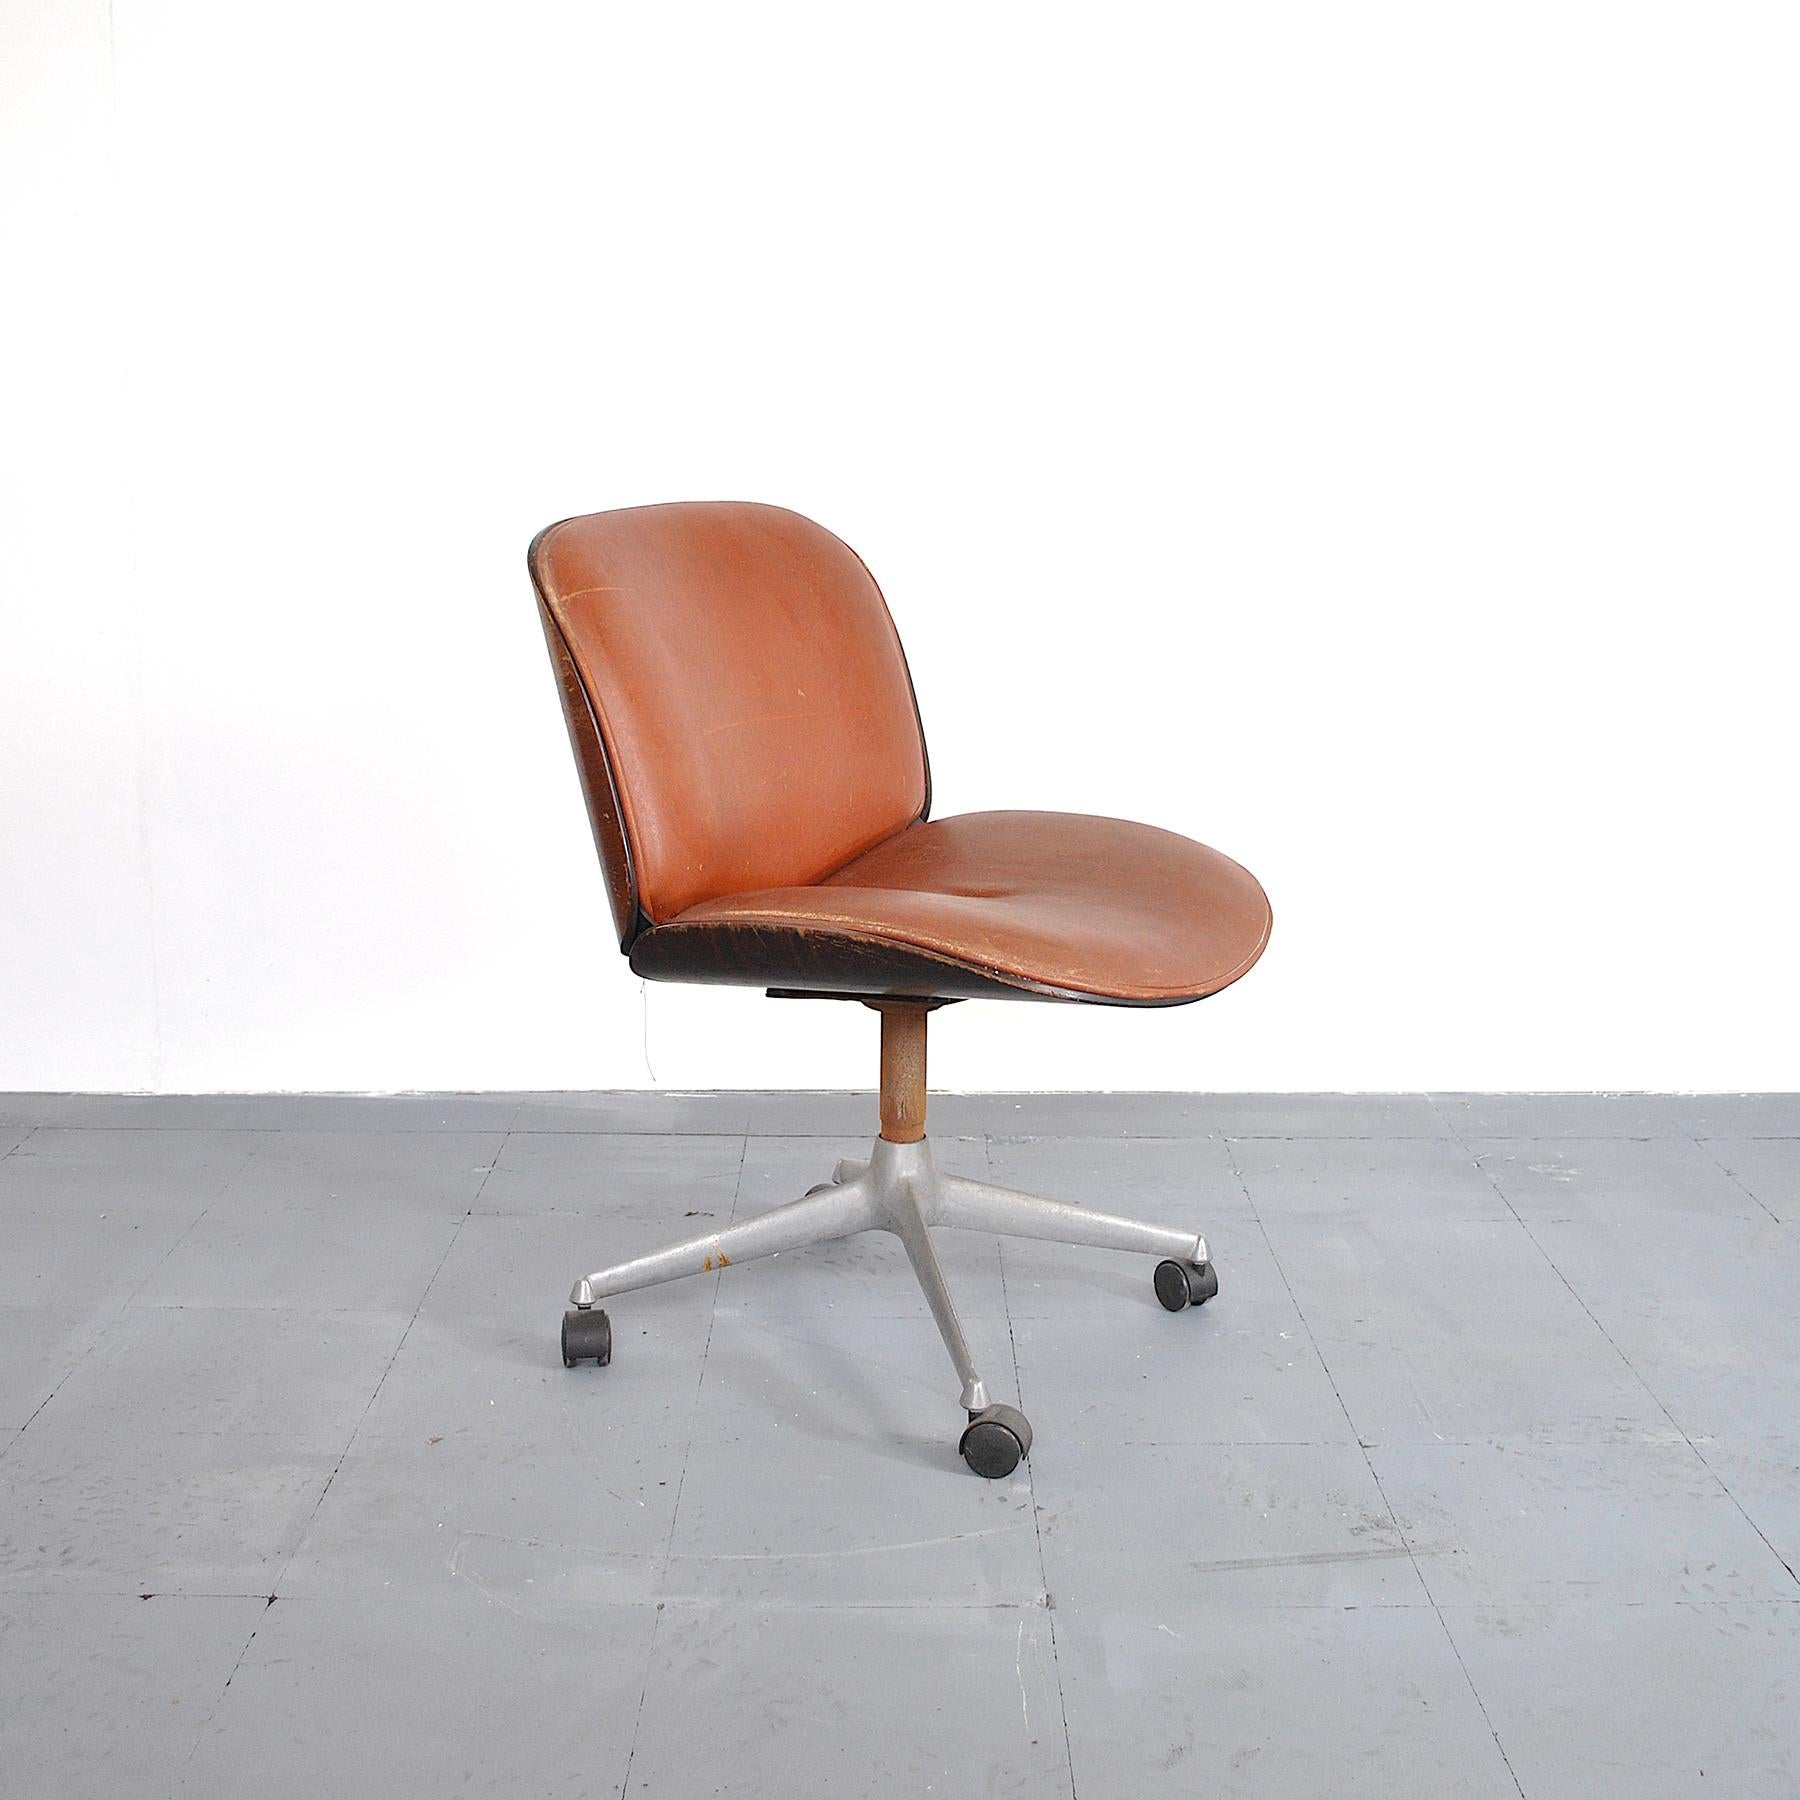 Swivel office chair by Ico Parisi for MIM Roma wooden frame with leather seat.